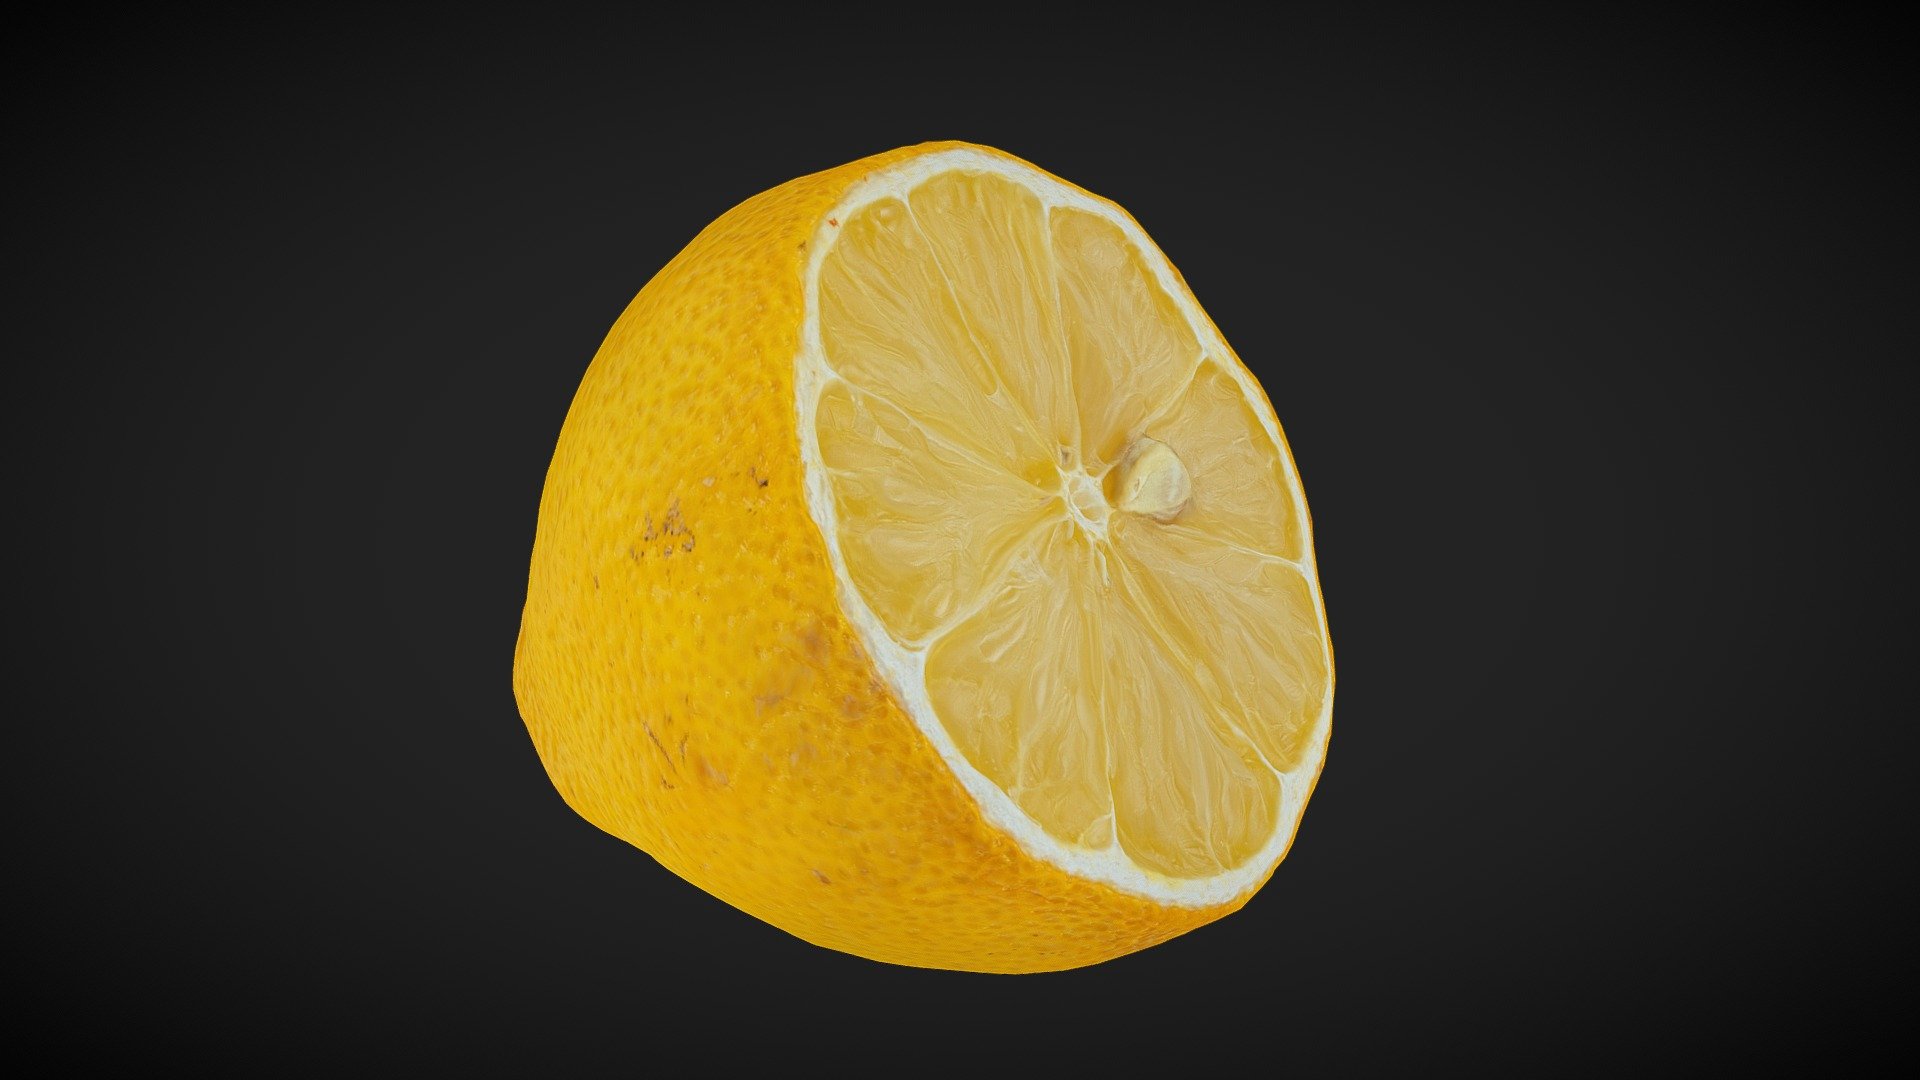 3D scan of a lemon cut in a half with visible inside, looking less fresh but still fine to eat (use).

Reconstucted in RC from 90 DSLR images.

8K texture 3d model